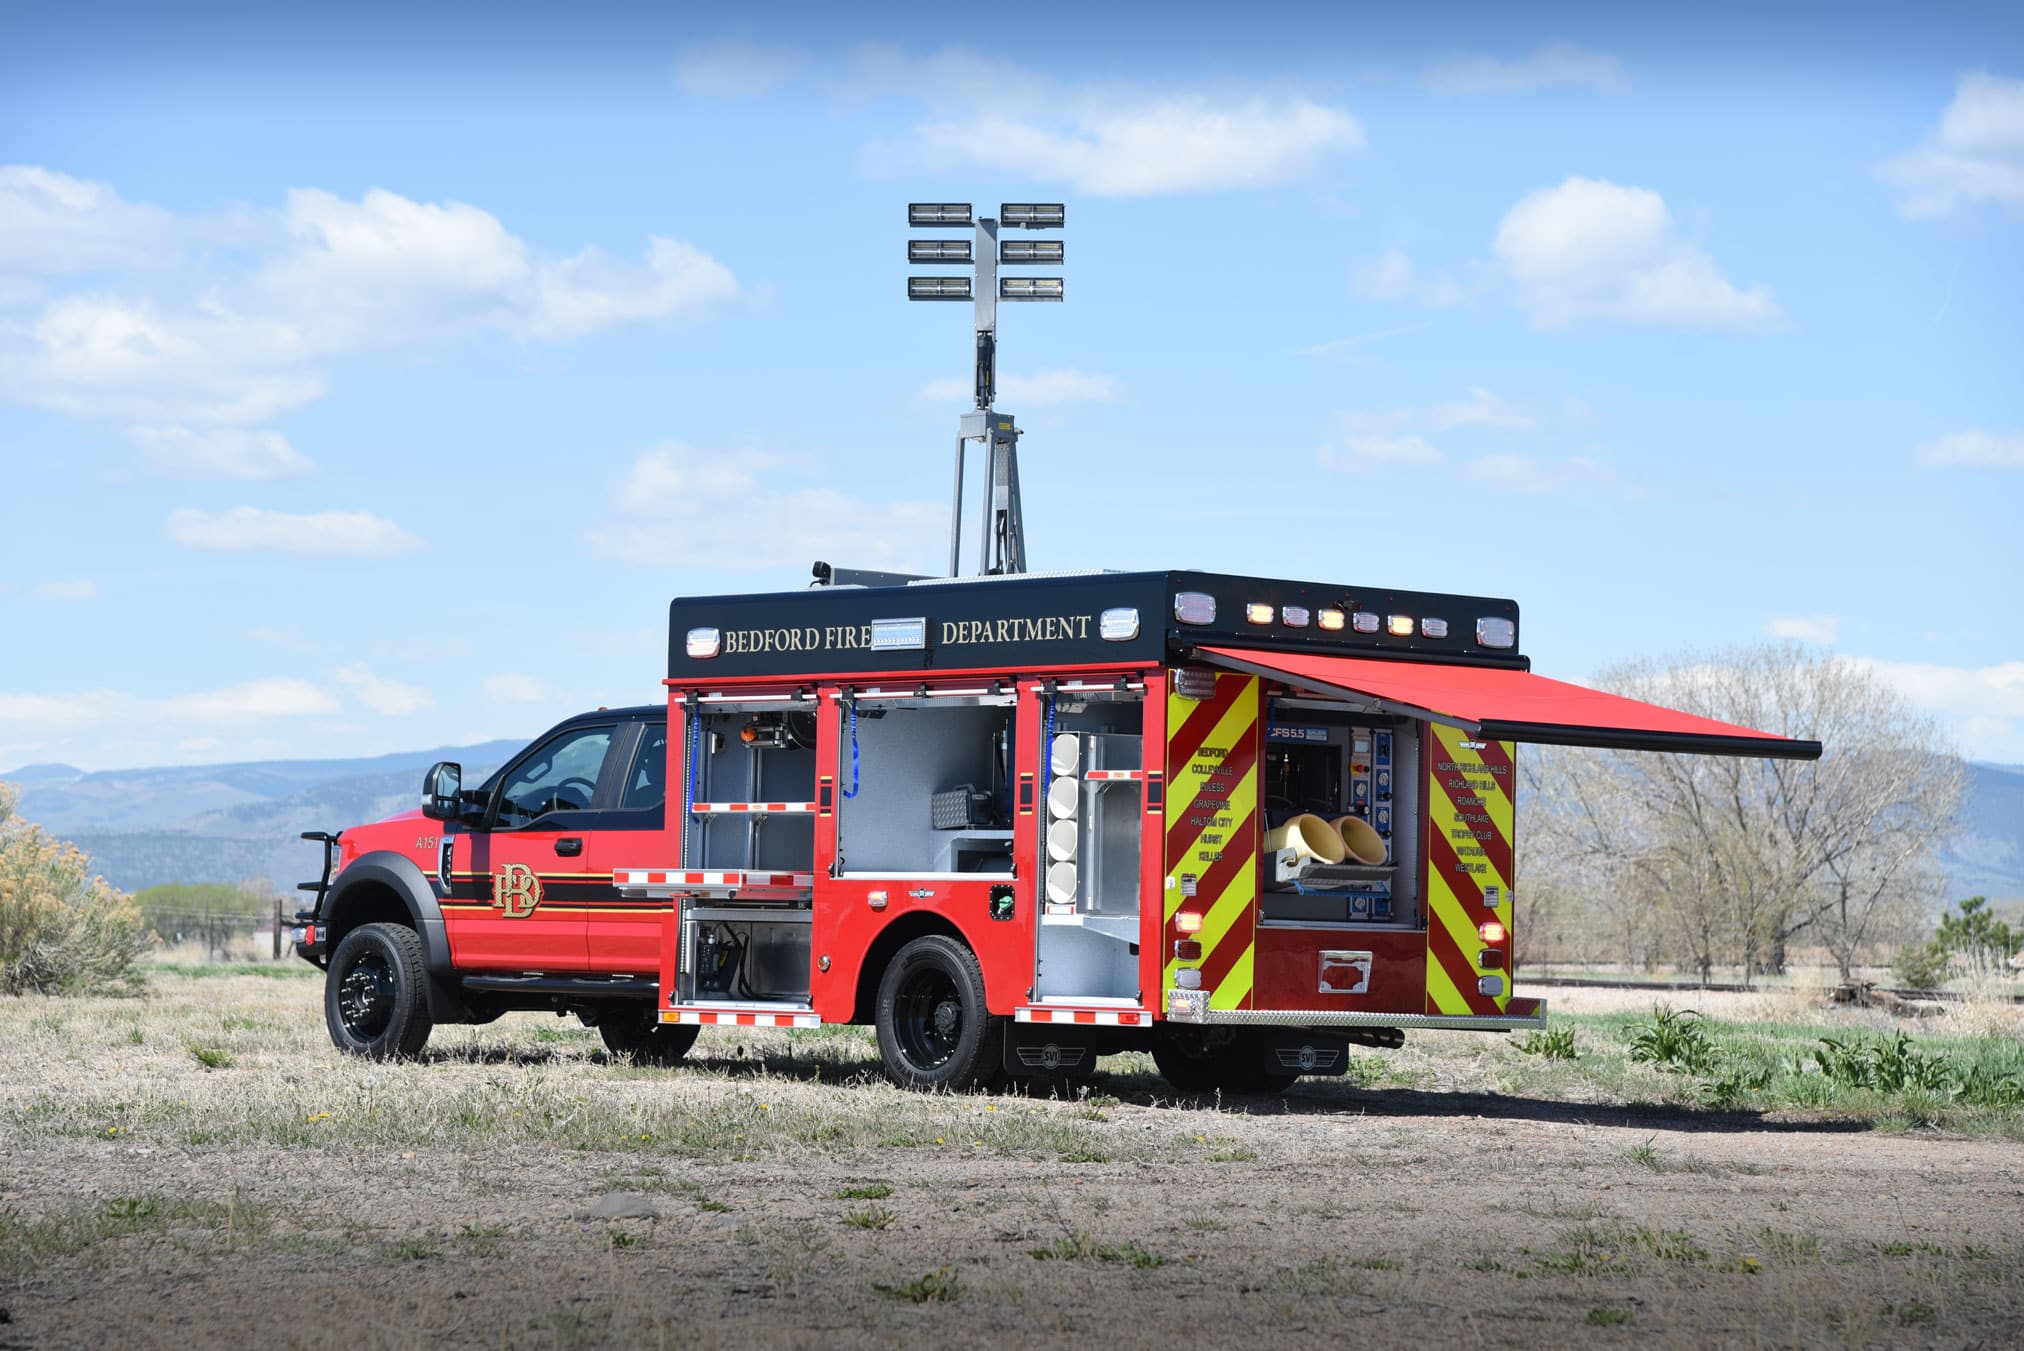 Featured image for “NEFDA, Texas Bedford Fire Department Air/Light Unit #1086”